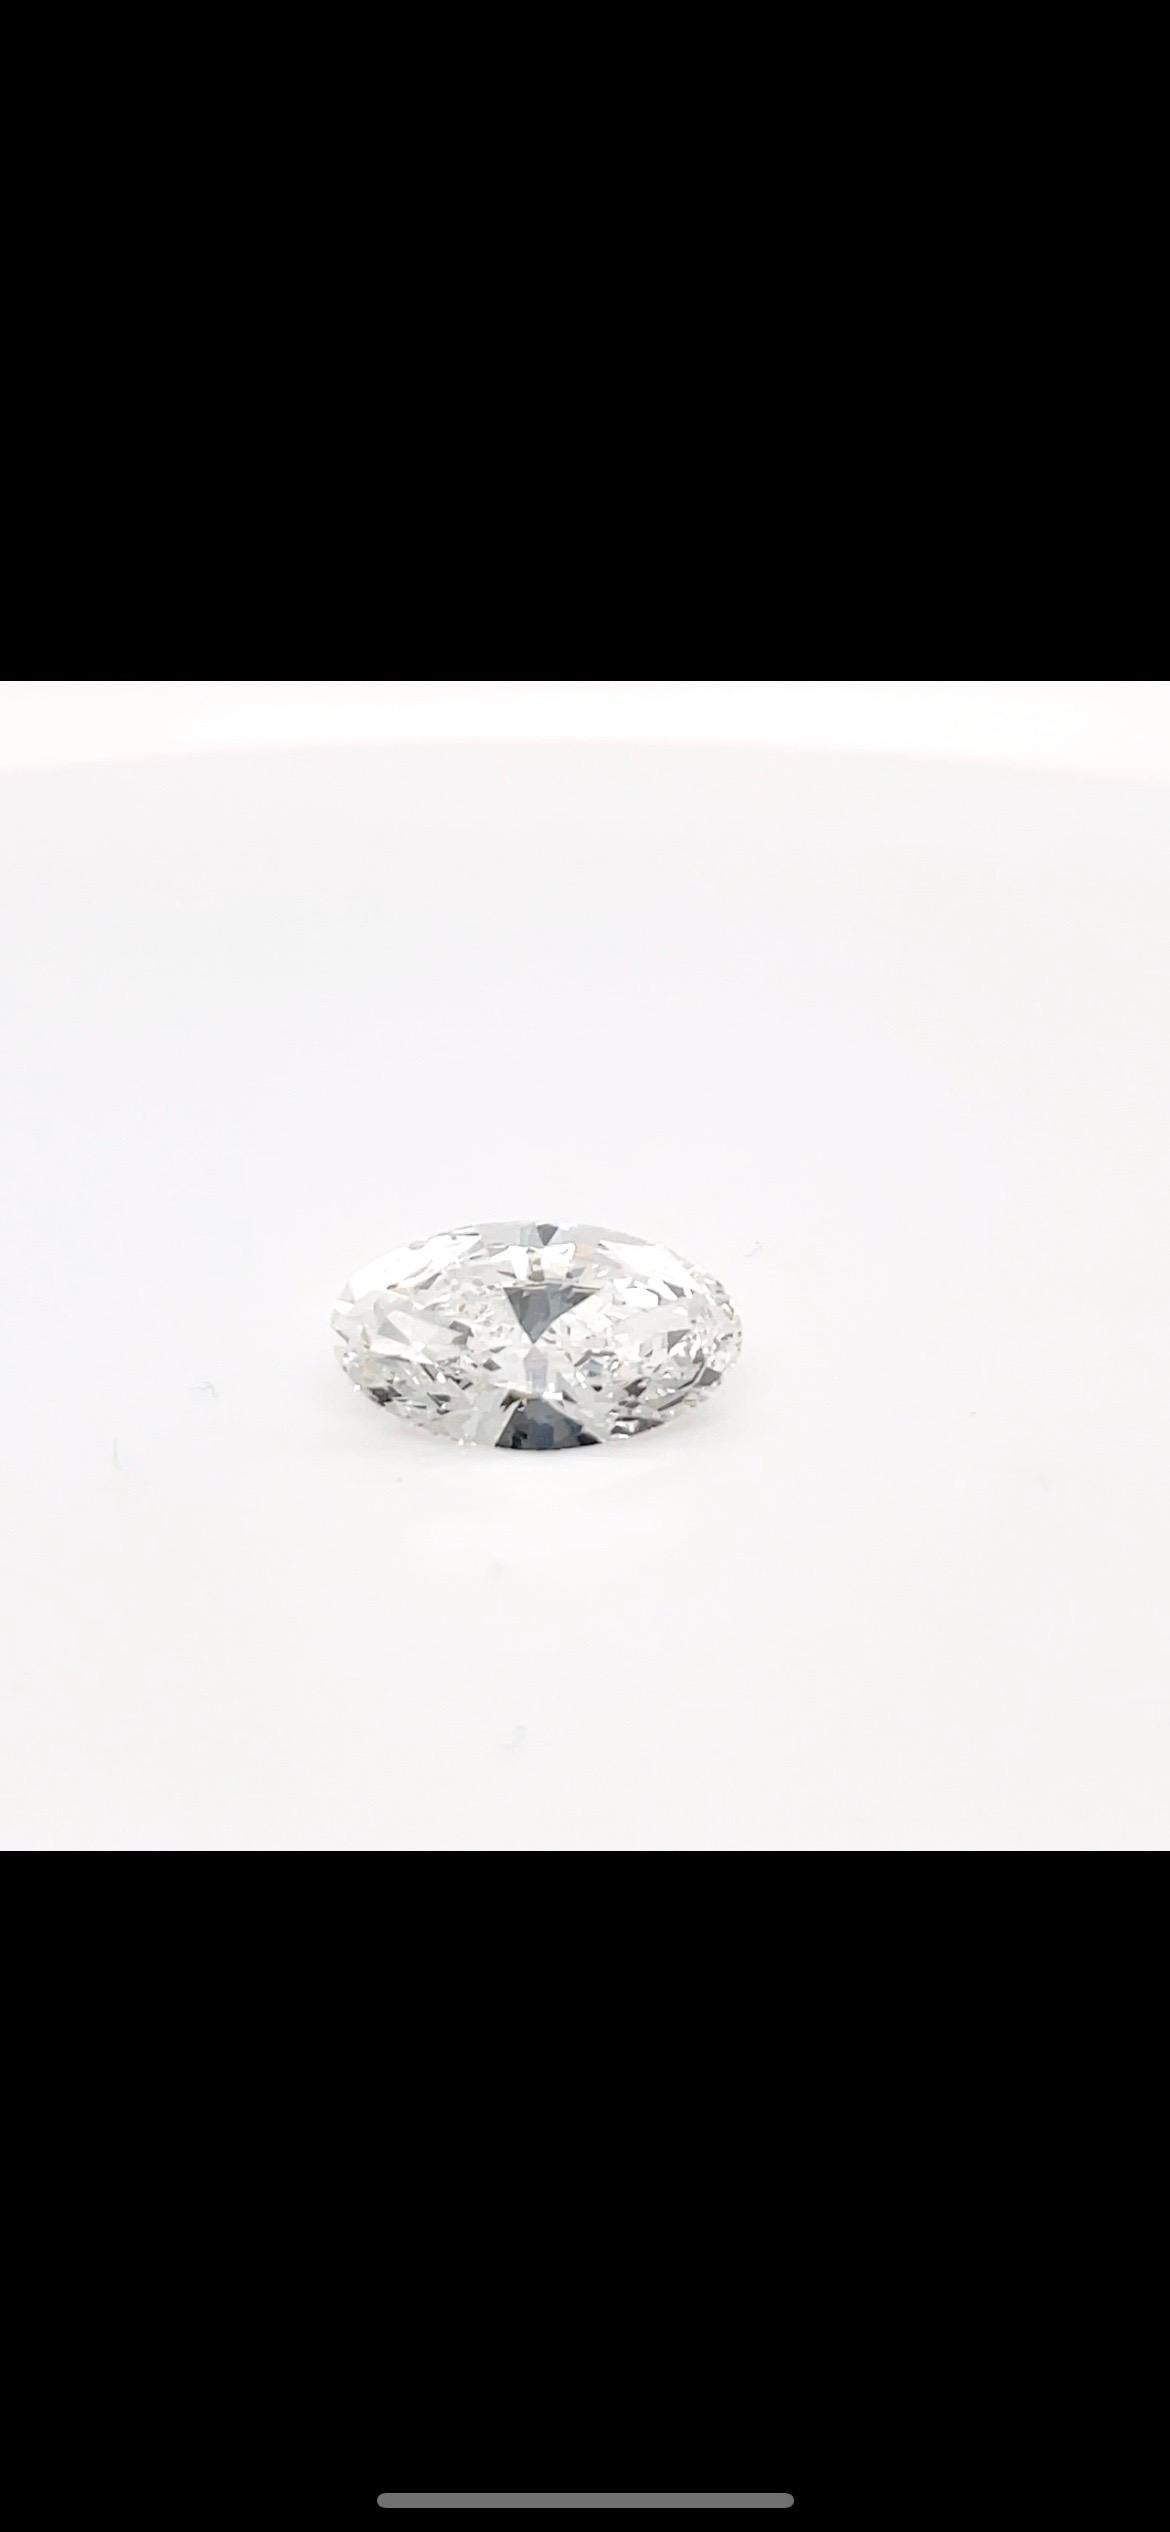 4 ct H VS1 Oval Natural GIA Diamond (Spreads Larger than 5 cts) GIA # 1176133151